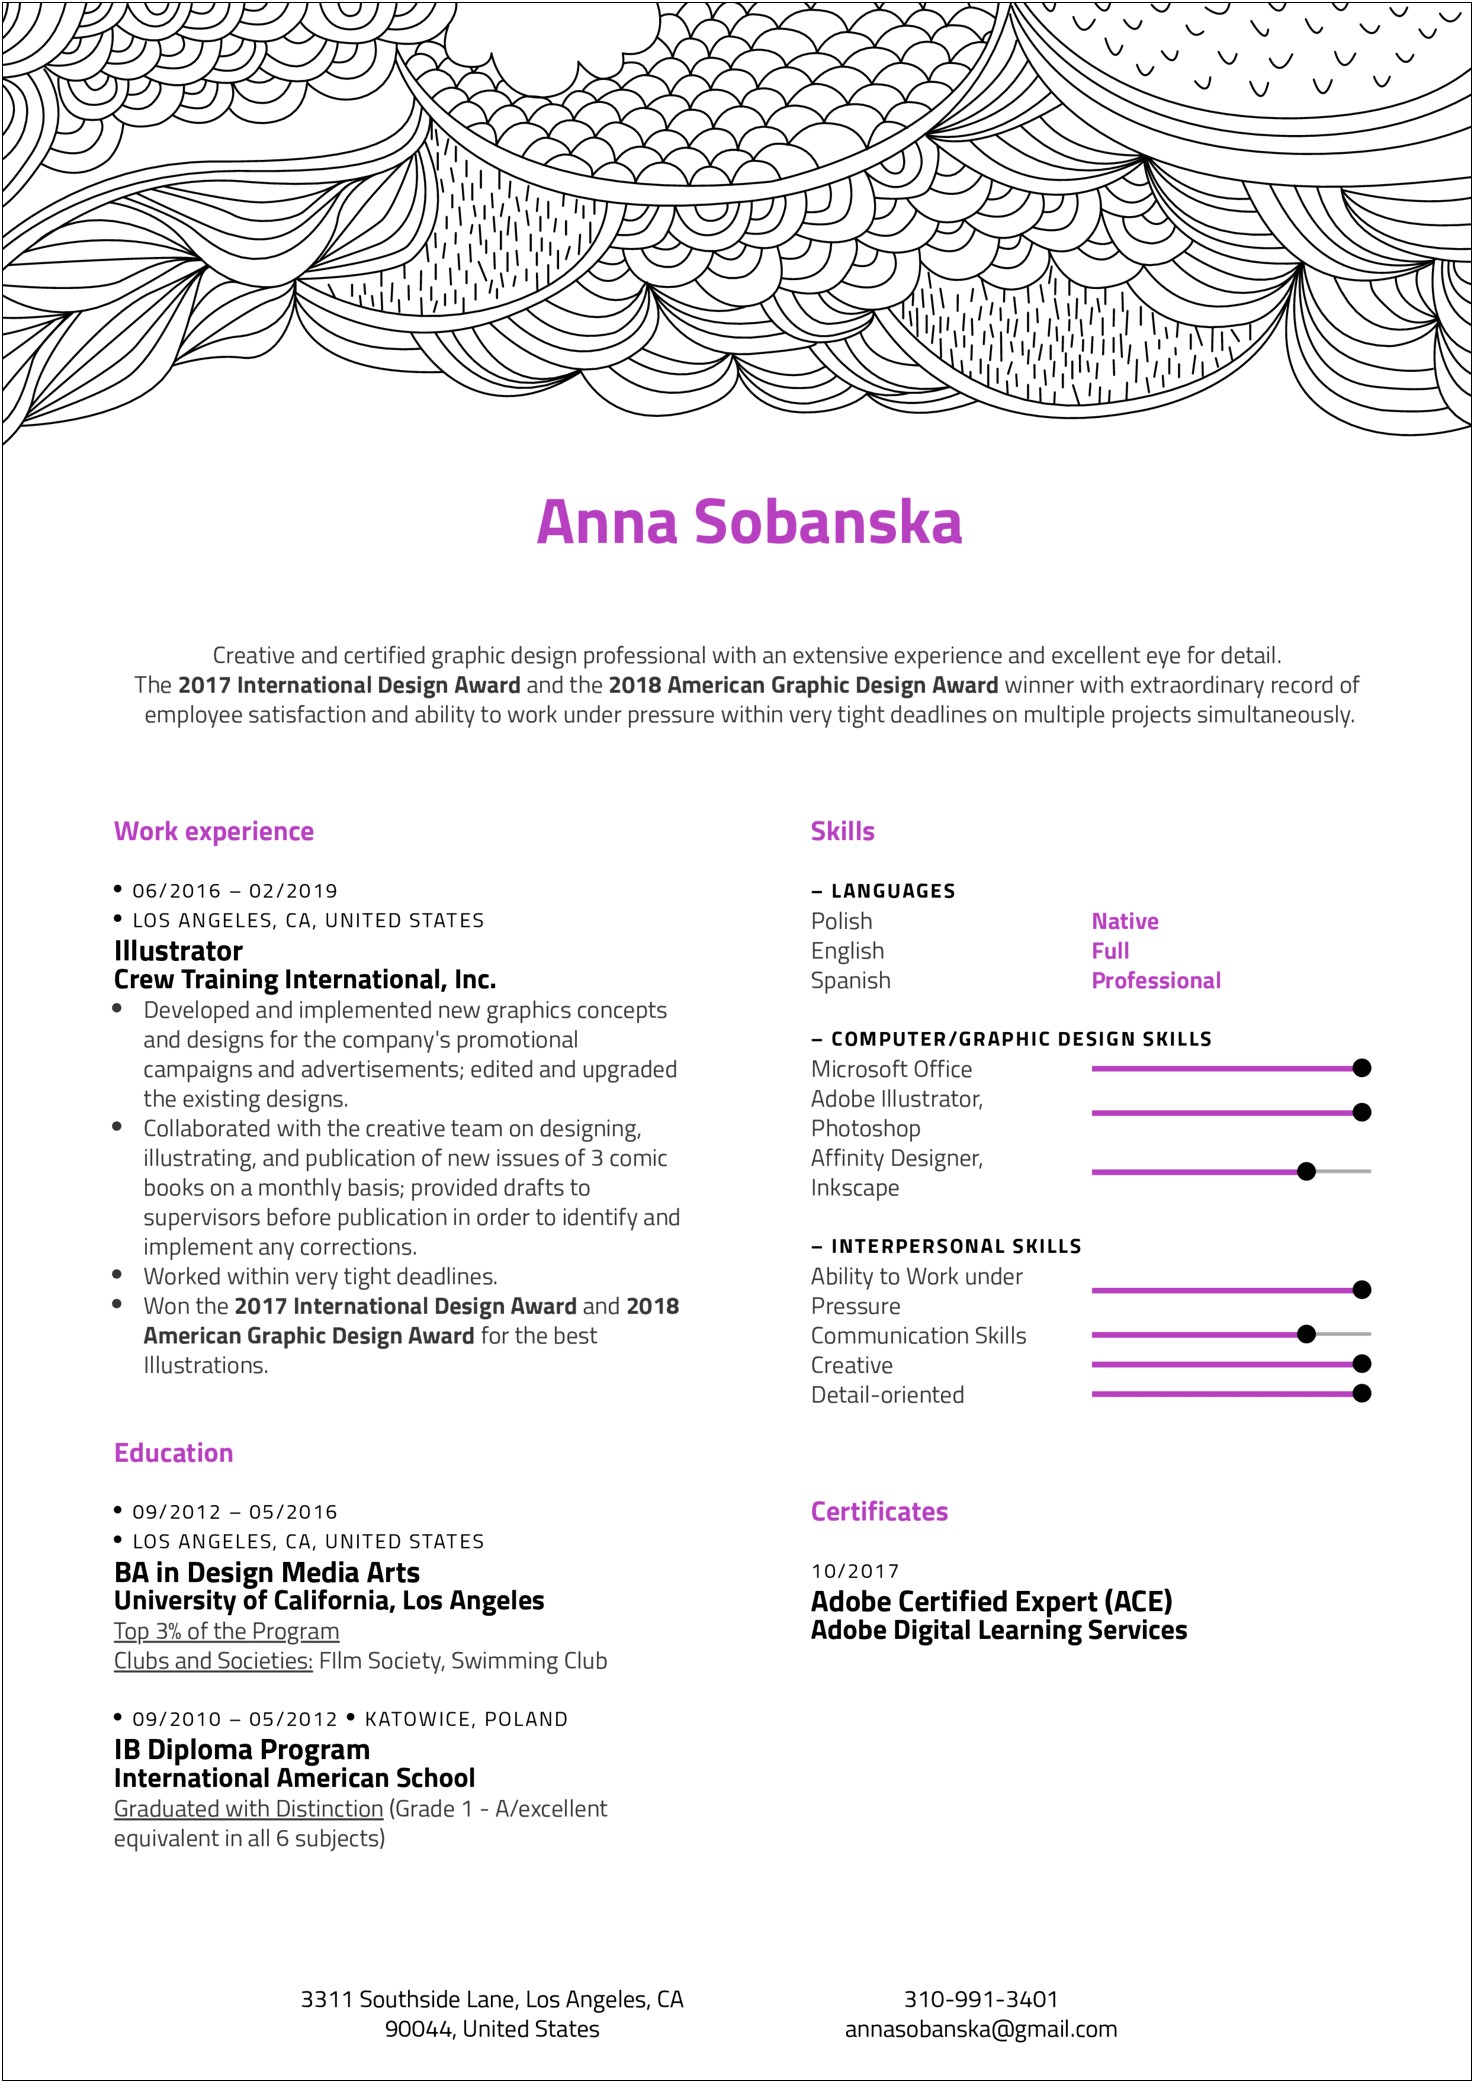 Freelance Artist Resume Without Work Experience